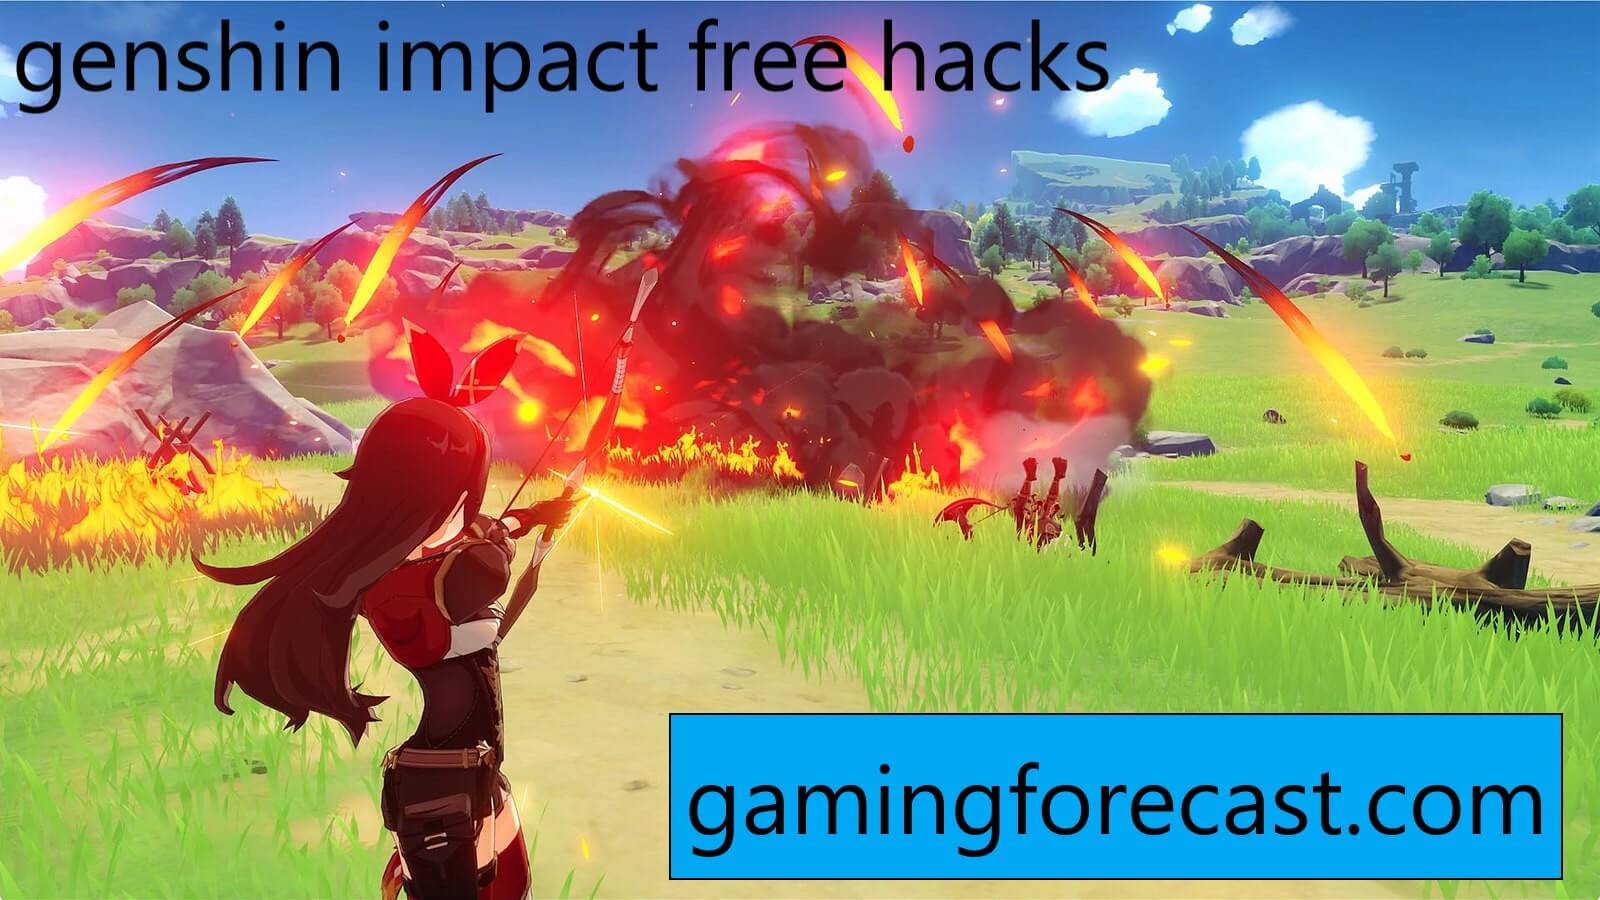 Genshin Impact Mod Teleport Hack And More 21 Undetected Gaming Forecast Download Free Online Game Hacks